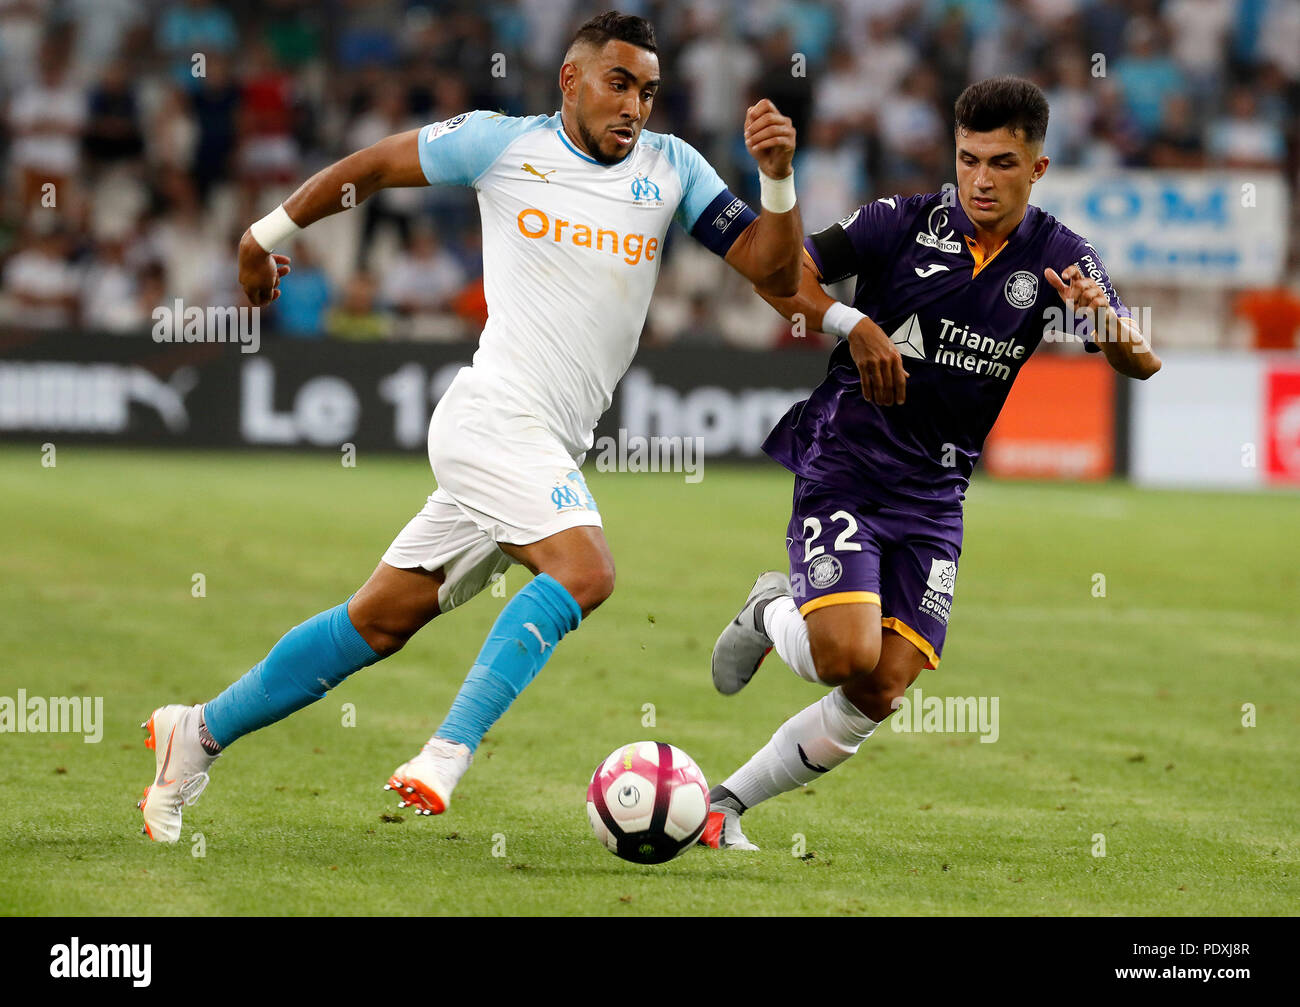 Marseille. 10th Aug, 2018. Dimitri Payet (L) of Marseille vies with Manu  Garcia of Toulouse during the French Ligue 1 football match 2018-19 season  1st round in Marseille, France on Aug. 10,